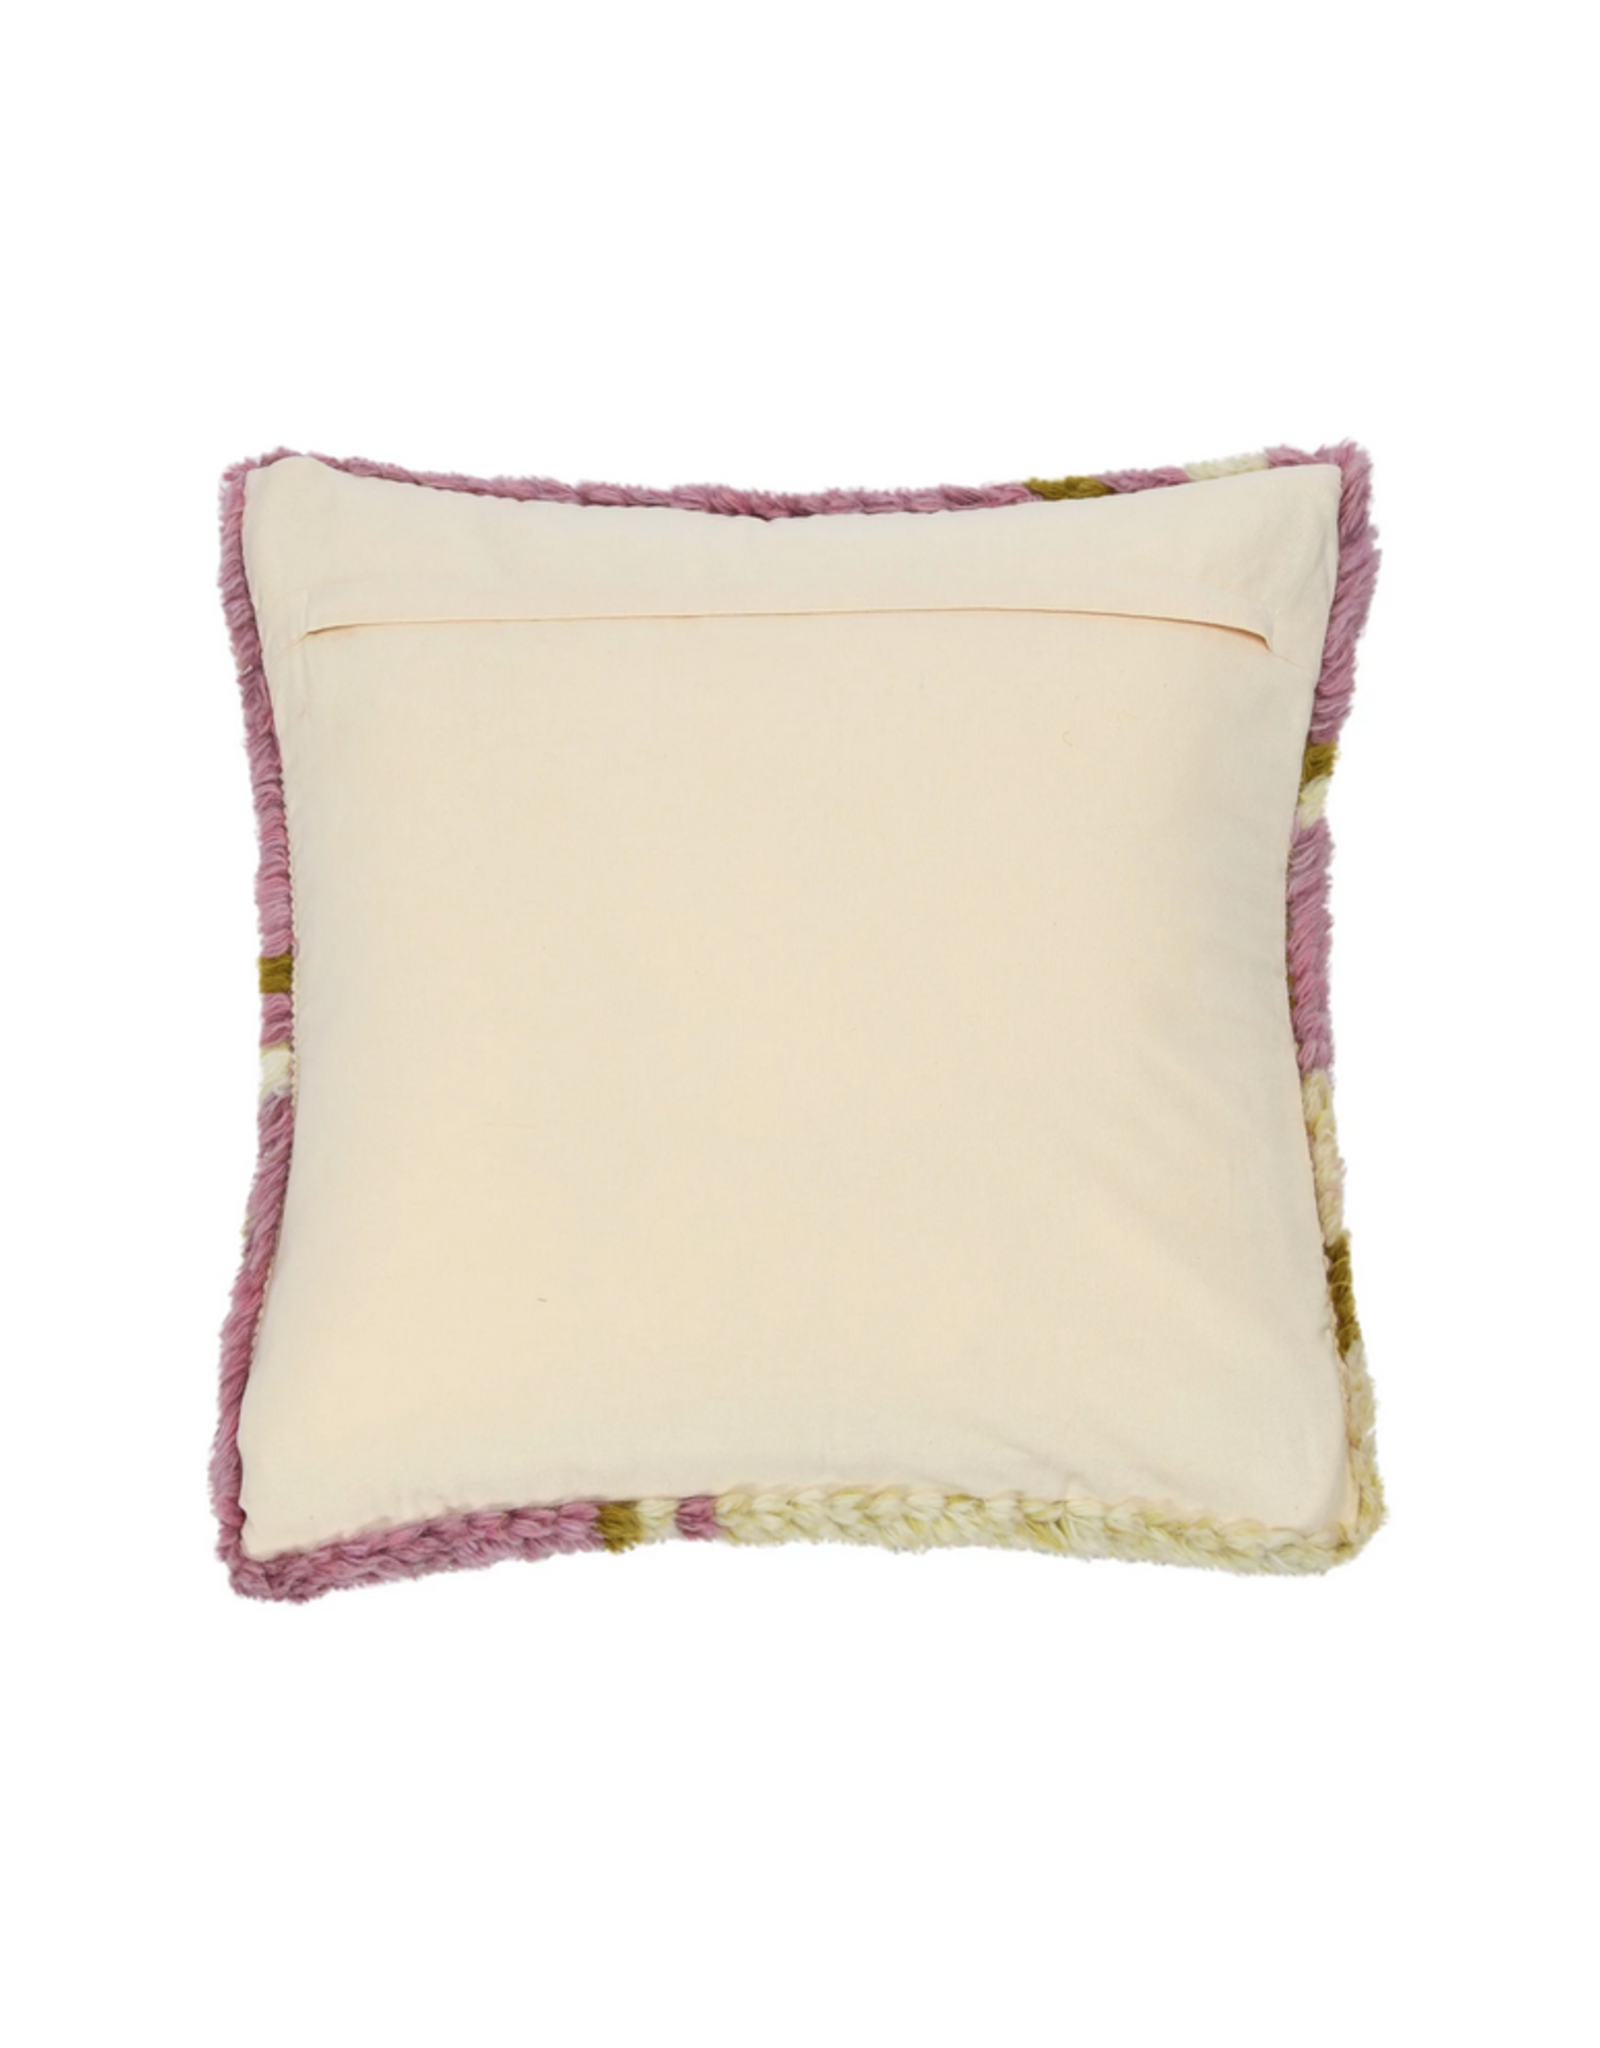 Cream + Chartreuse + Purple Tufted Pillow